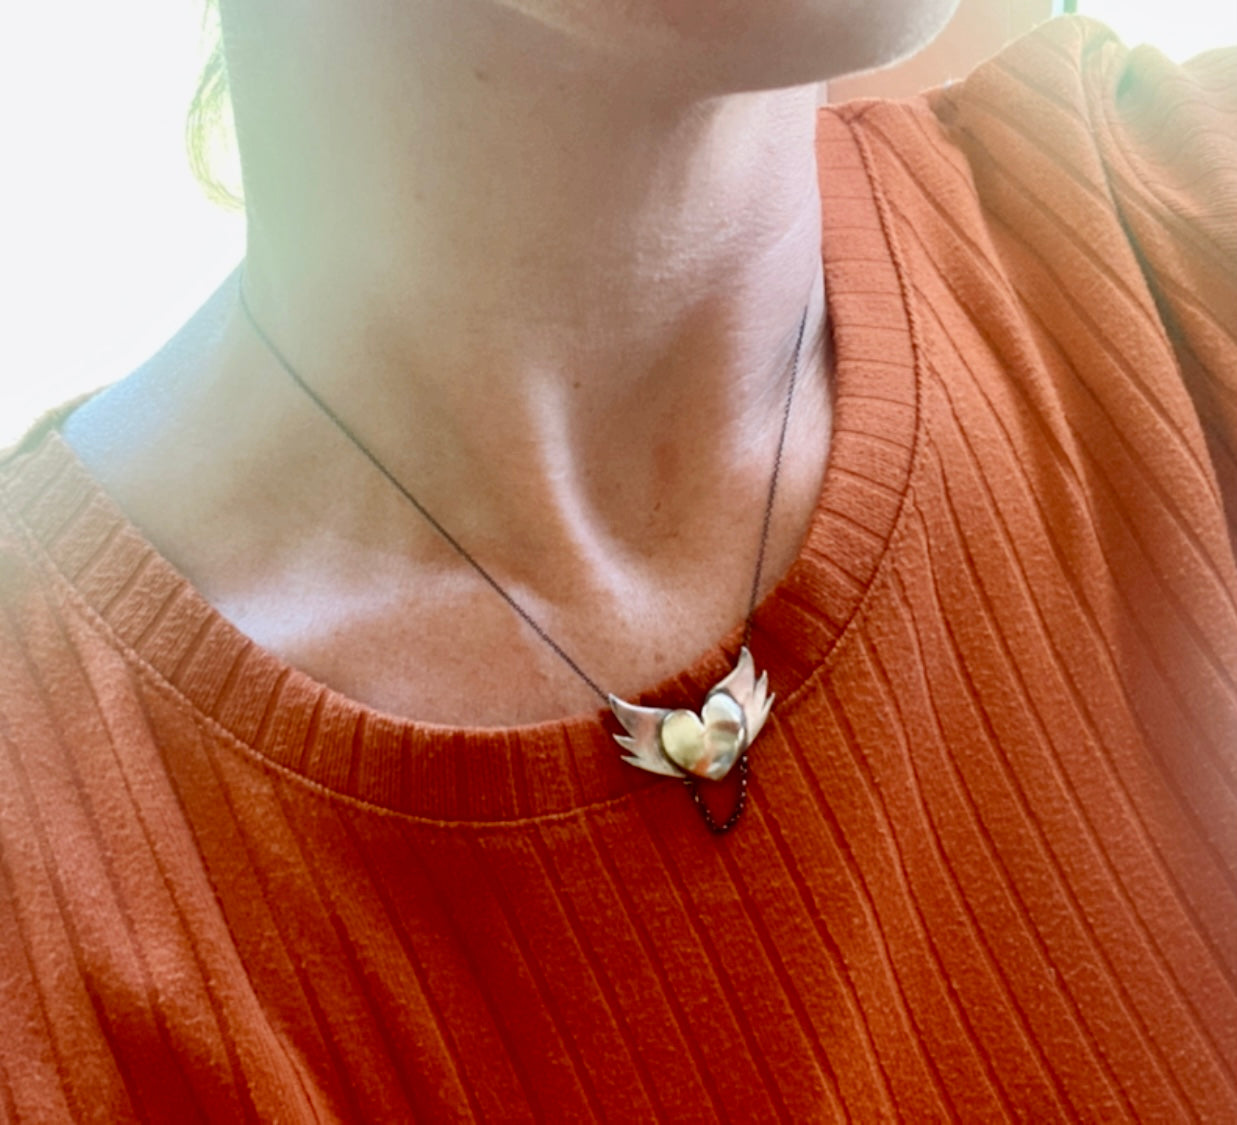 The silver winged brass heart pendant worn on a model, showing how it elegantly drapes around the neck with a partial view of an orange blouse.